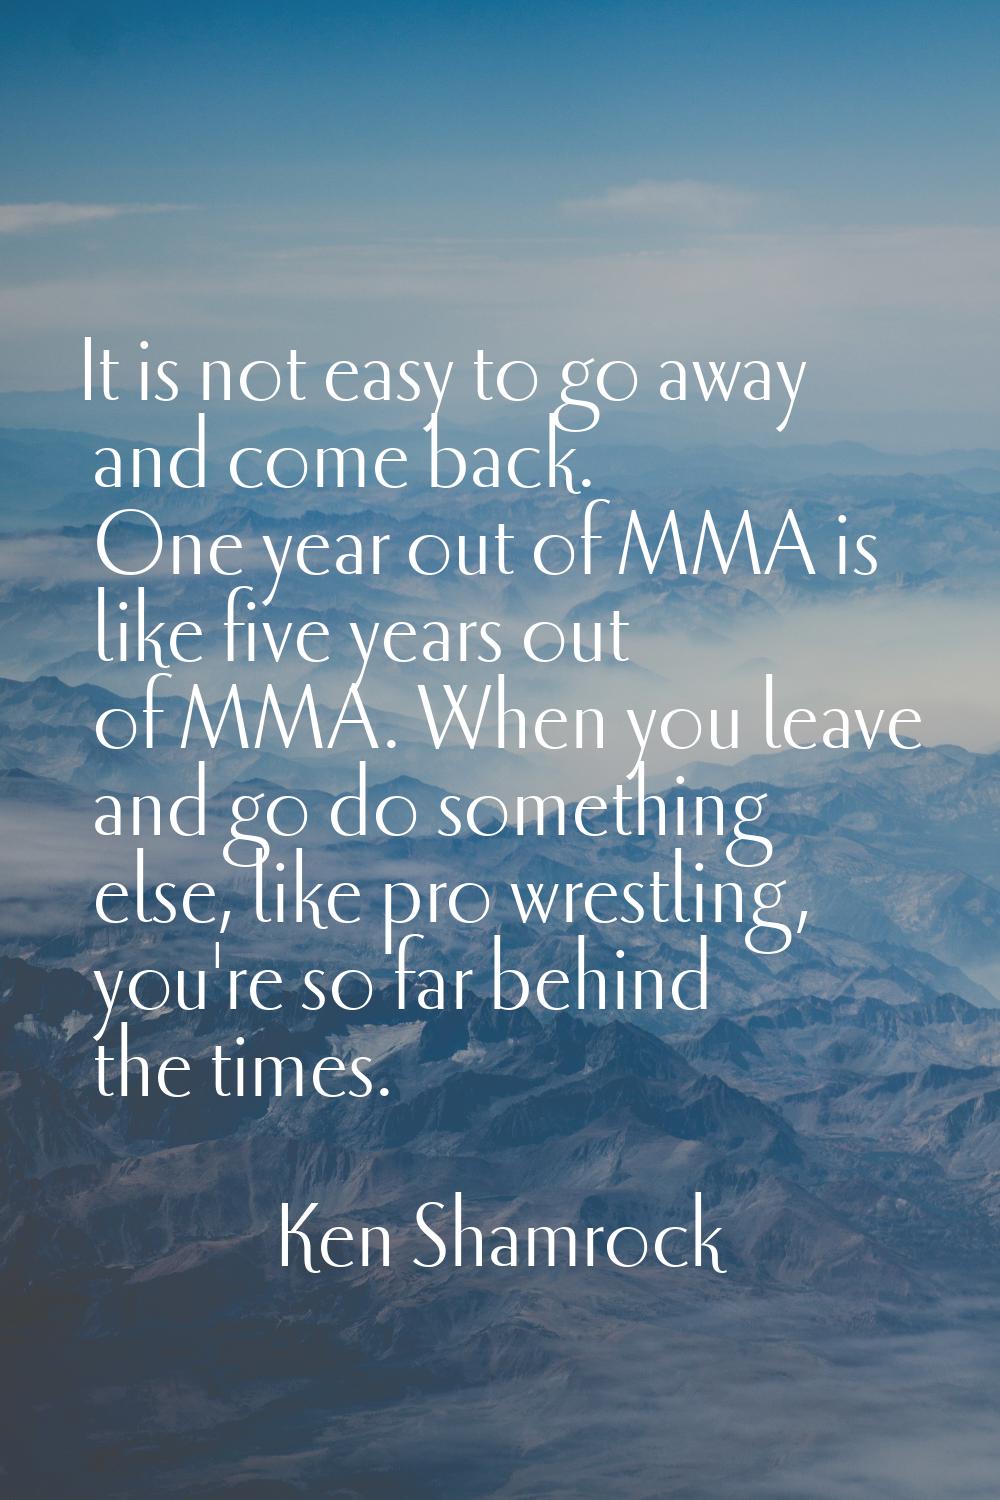 It is not easy to go away and come back. One year out of MMA is like five years out of MMA. When yo